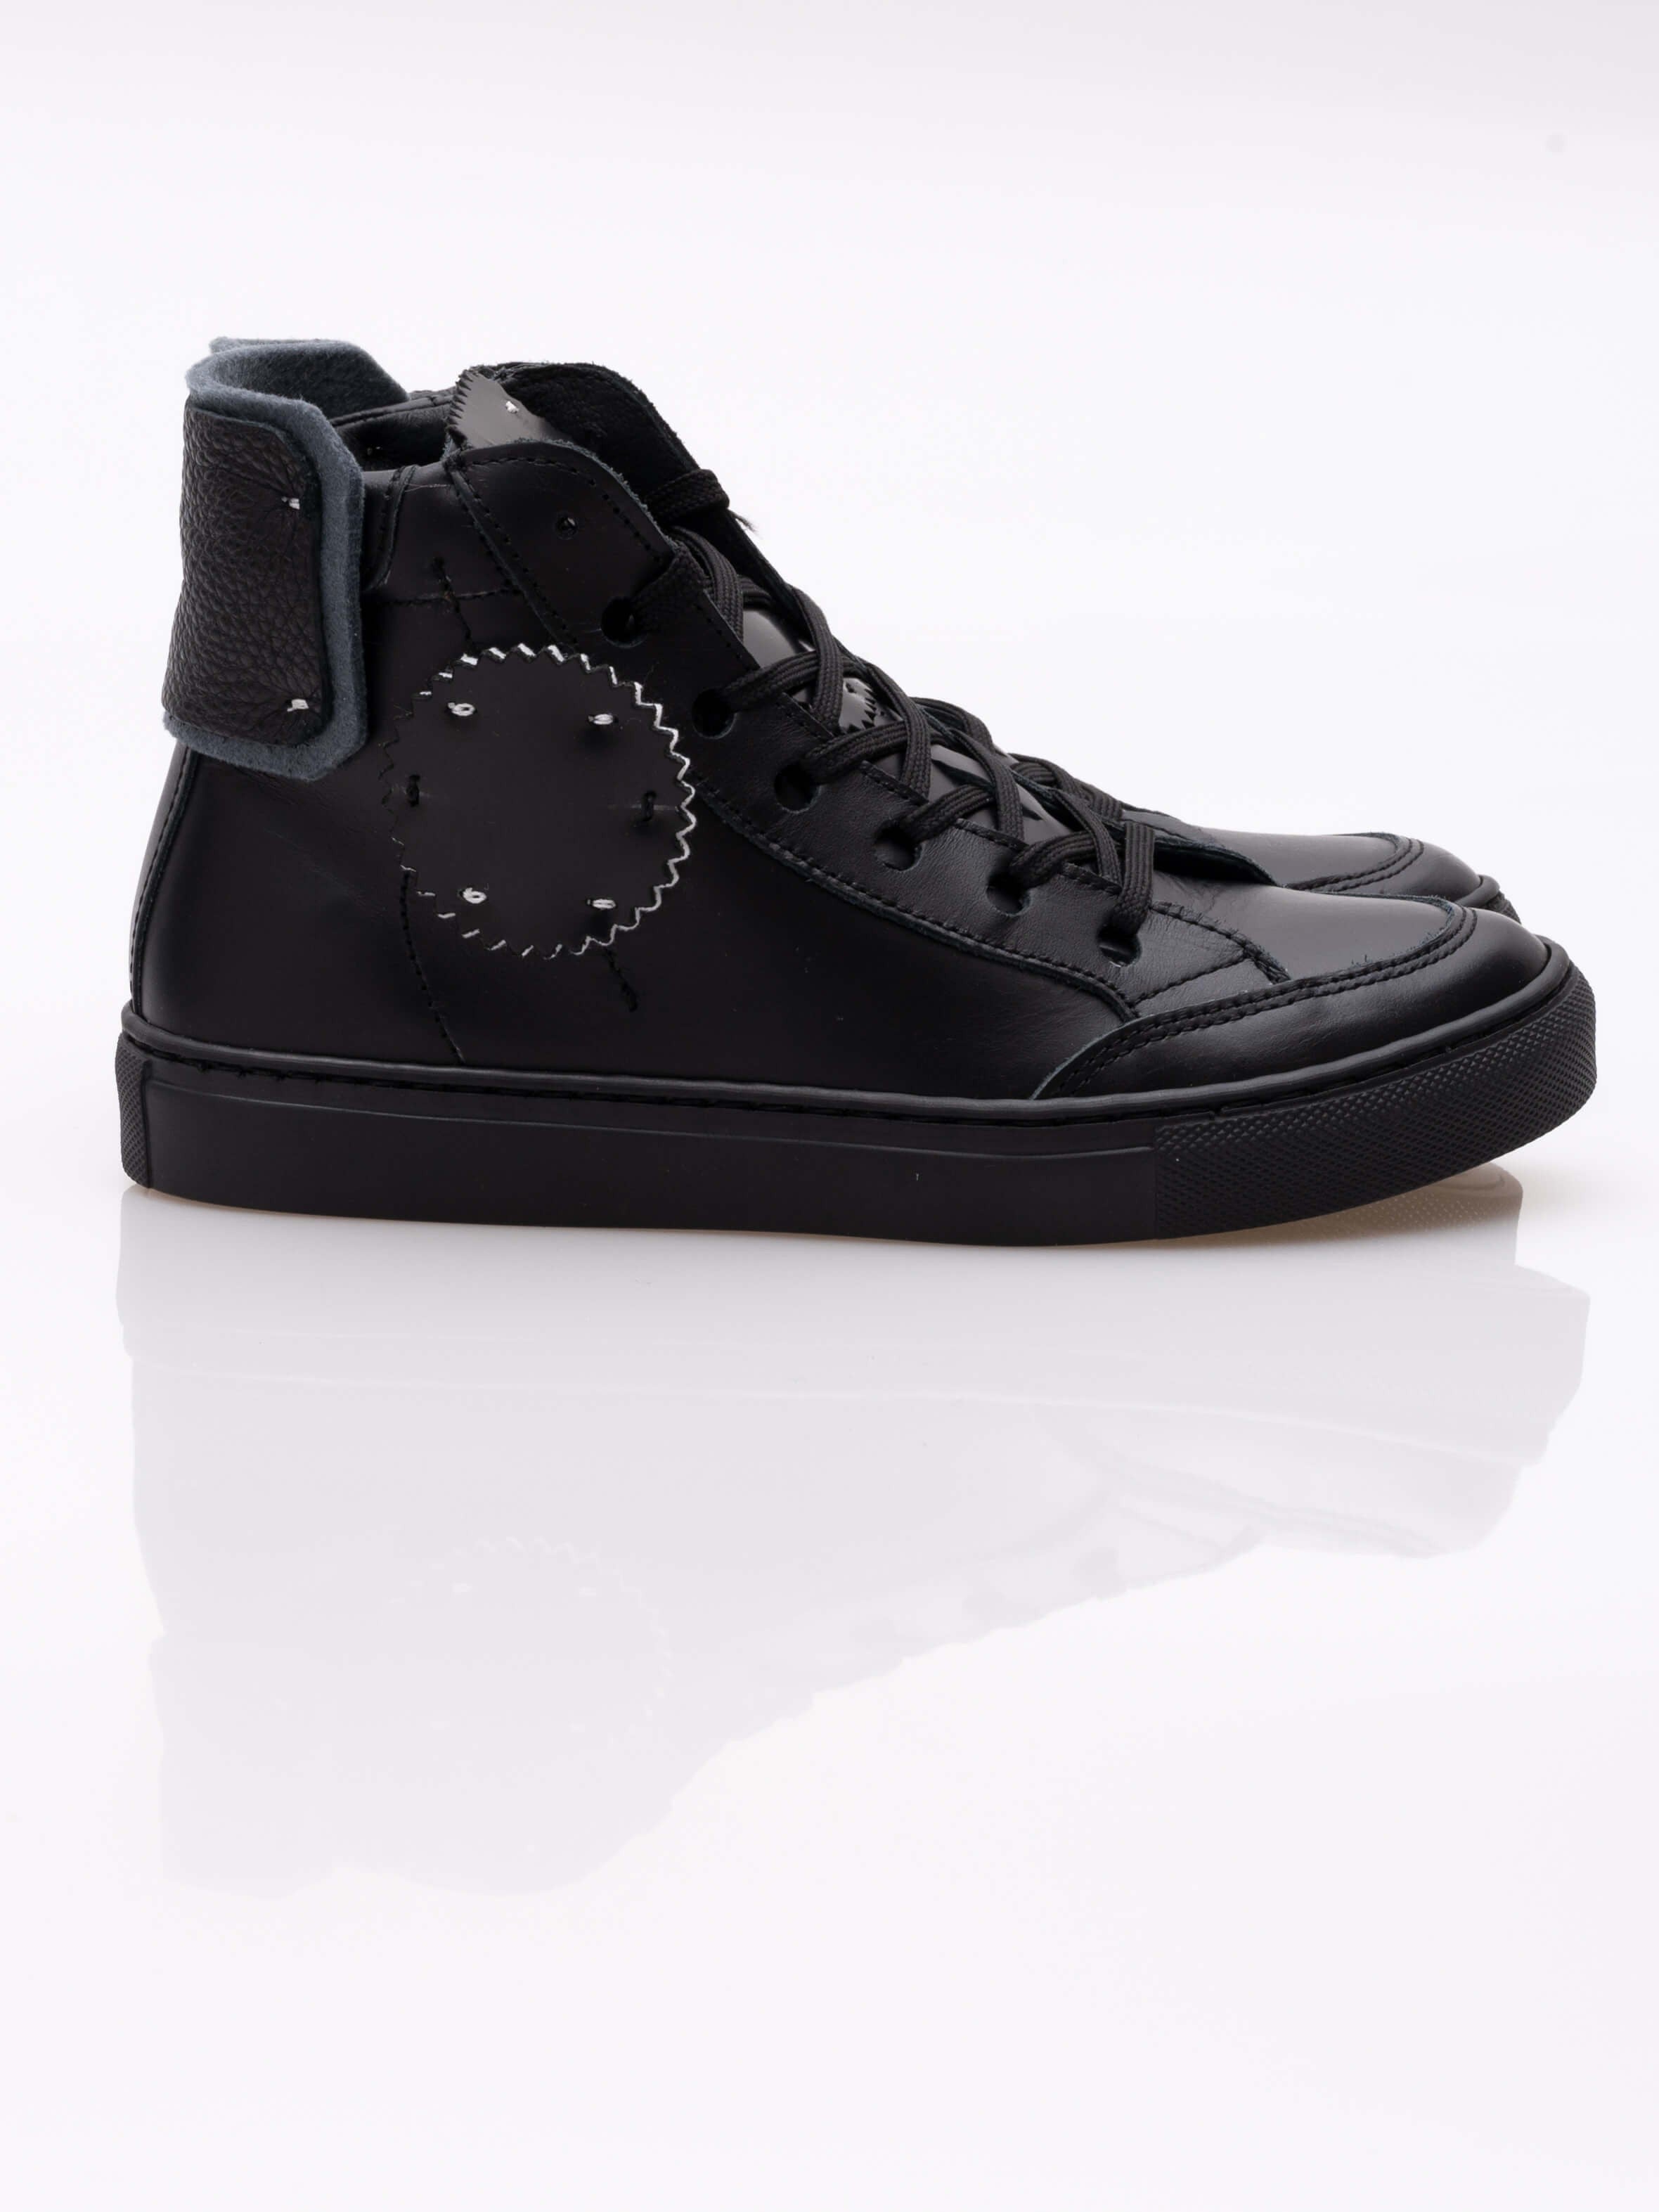 Round black - Flashes-shoes